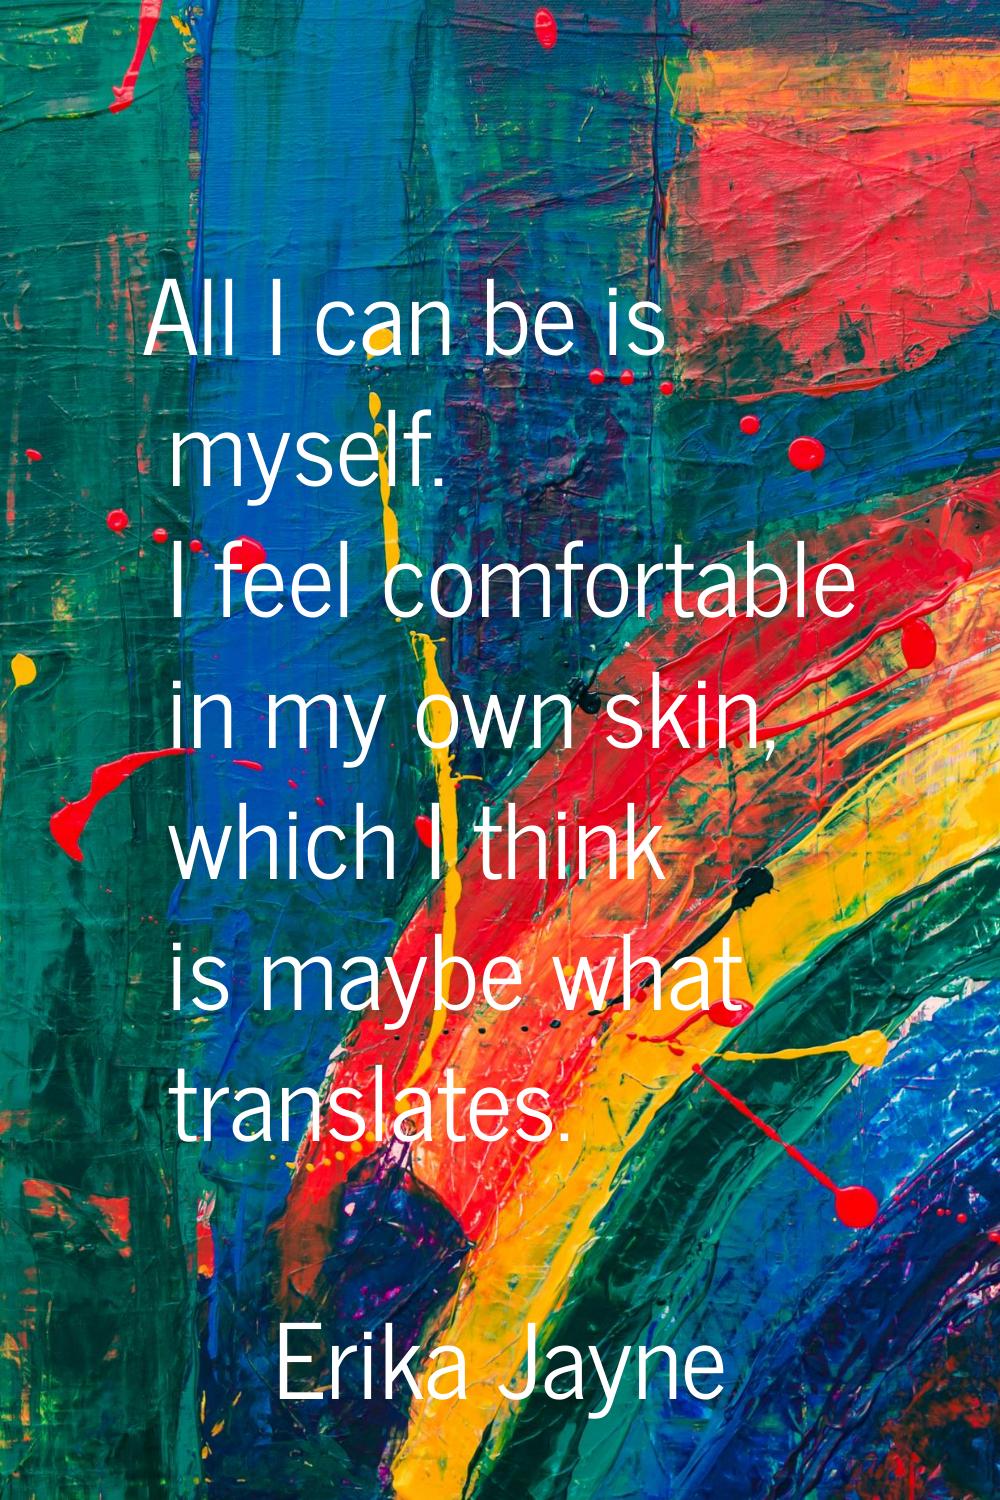 All I can be is myself. I feel comfortable in my own skin, which I think is maybe what translates.